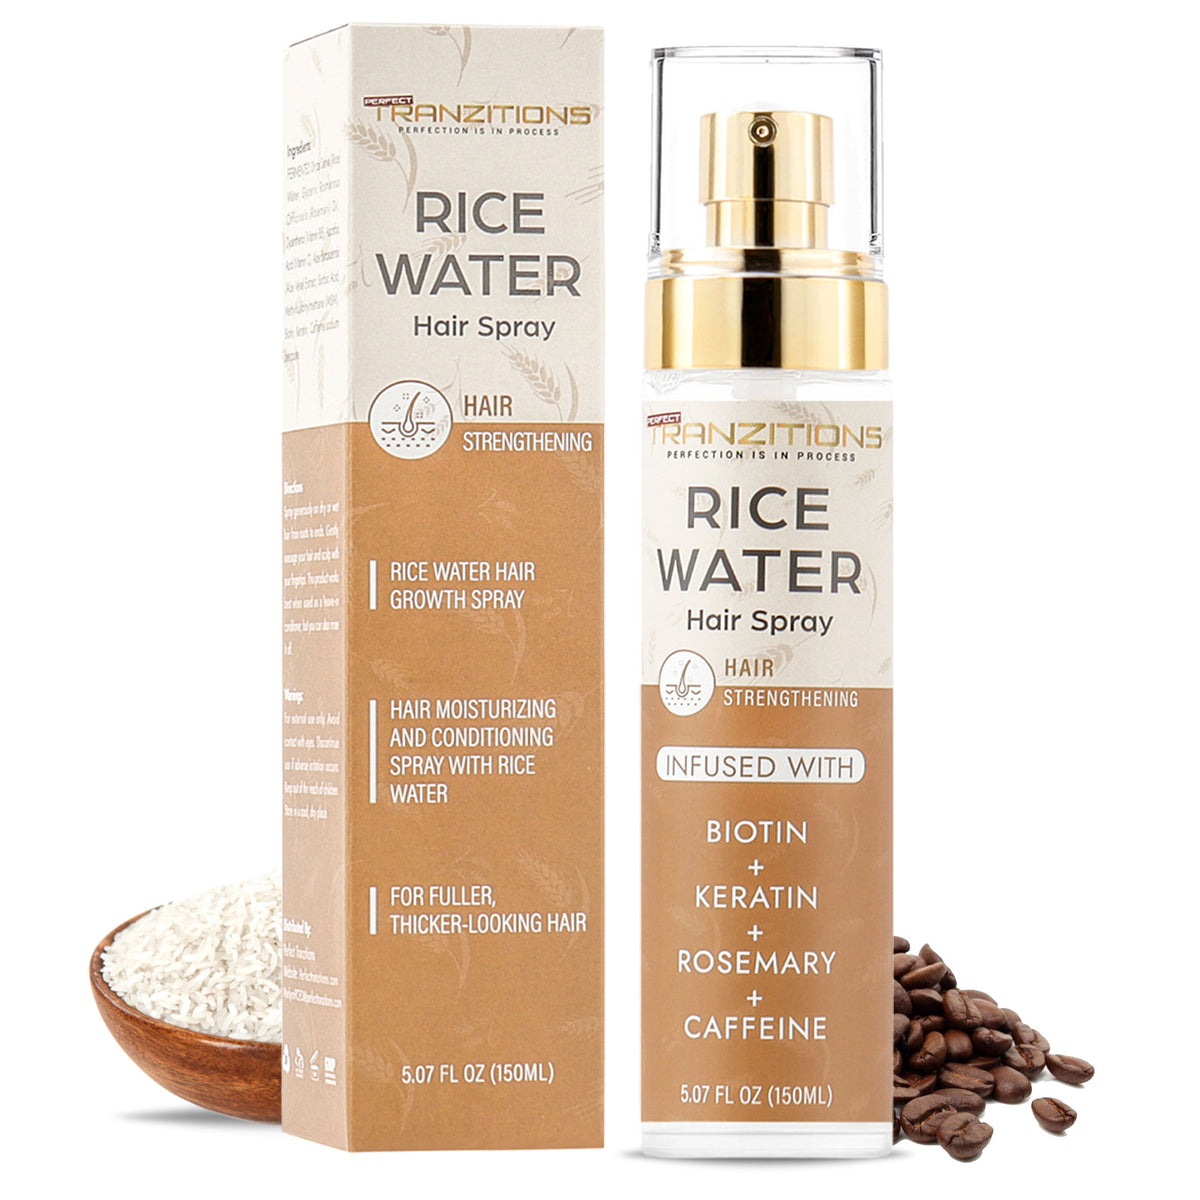 Fermented Rice Water For Hair Growth With Rosemary,Biotin & Keratin - Strengthen,Nourish,& Revitalize Your Hair & Scalp - Paraben & Sulfate-Free Natural Rice & Rosemary Water Spray For Hair Growth